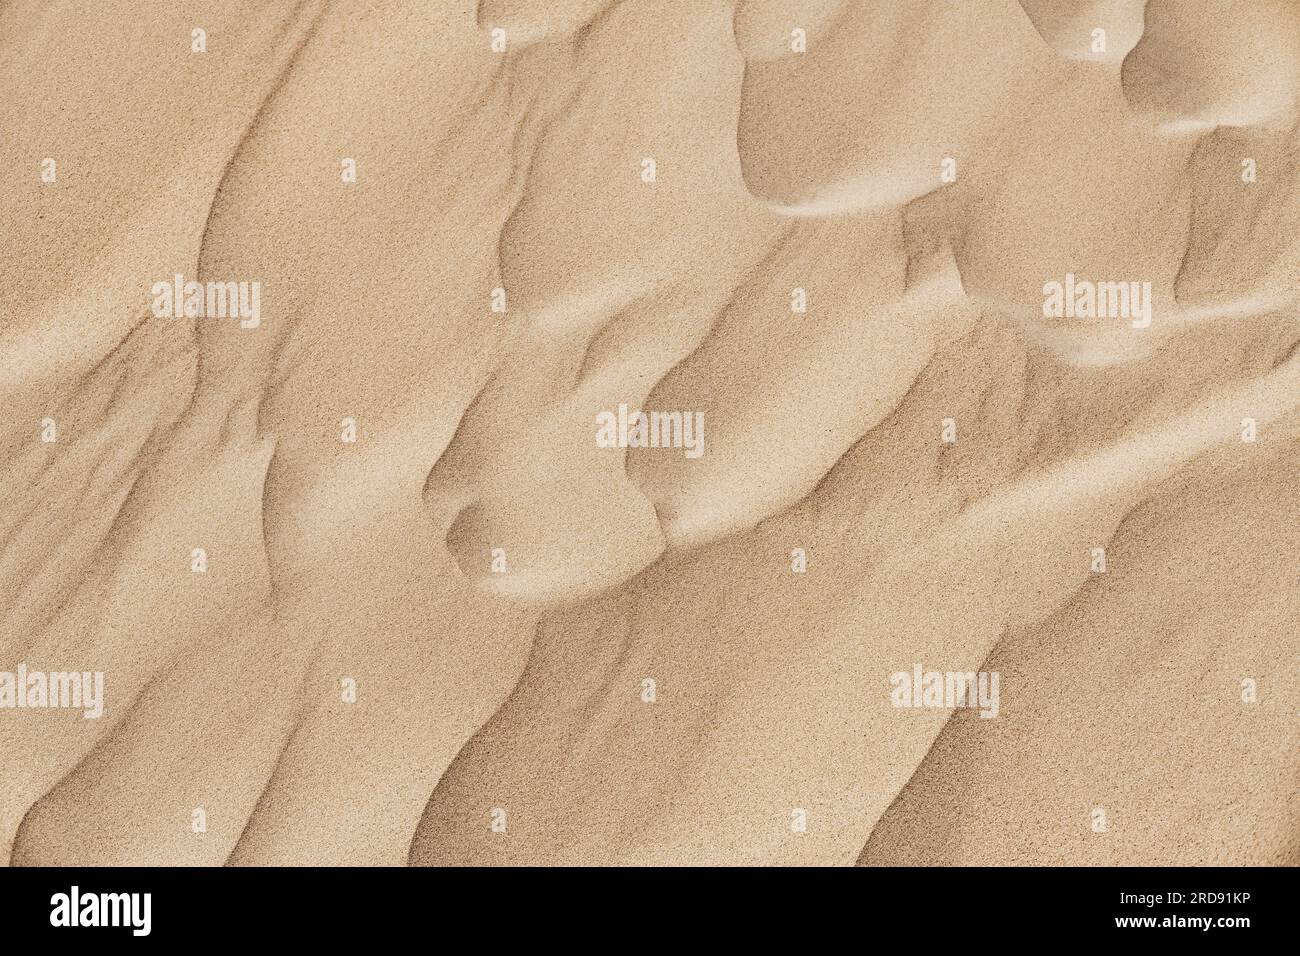 Natural sand texture. Yellow sand on the beach. Wavy sand background for summer designs. Stock Photo